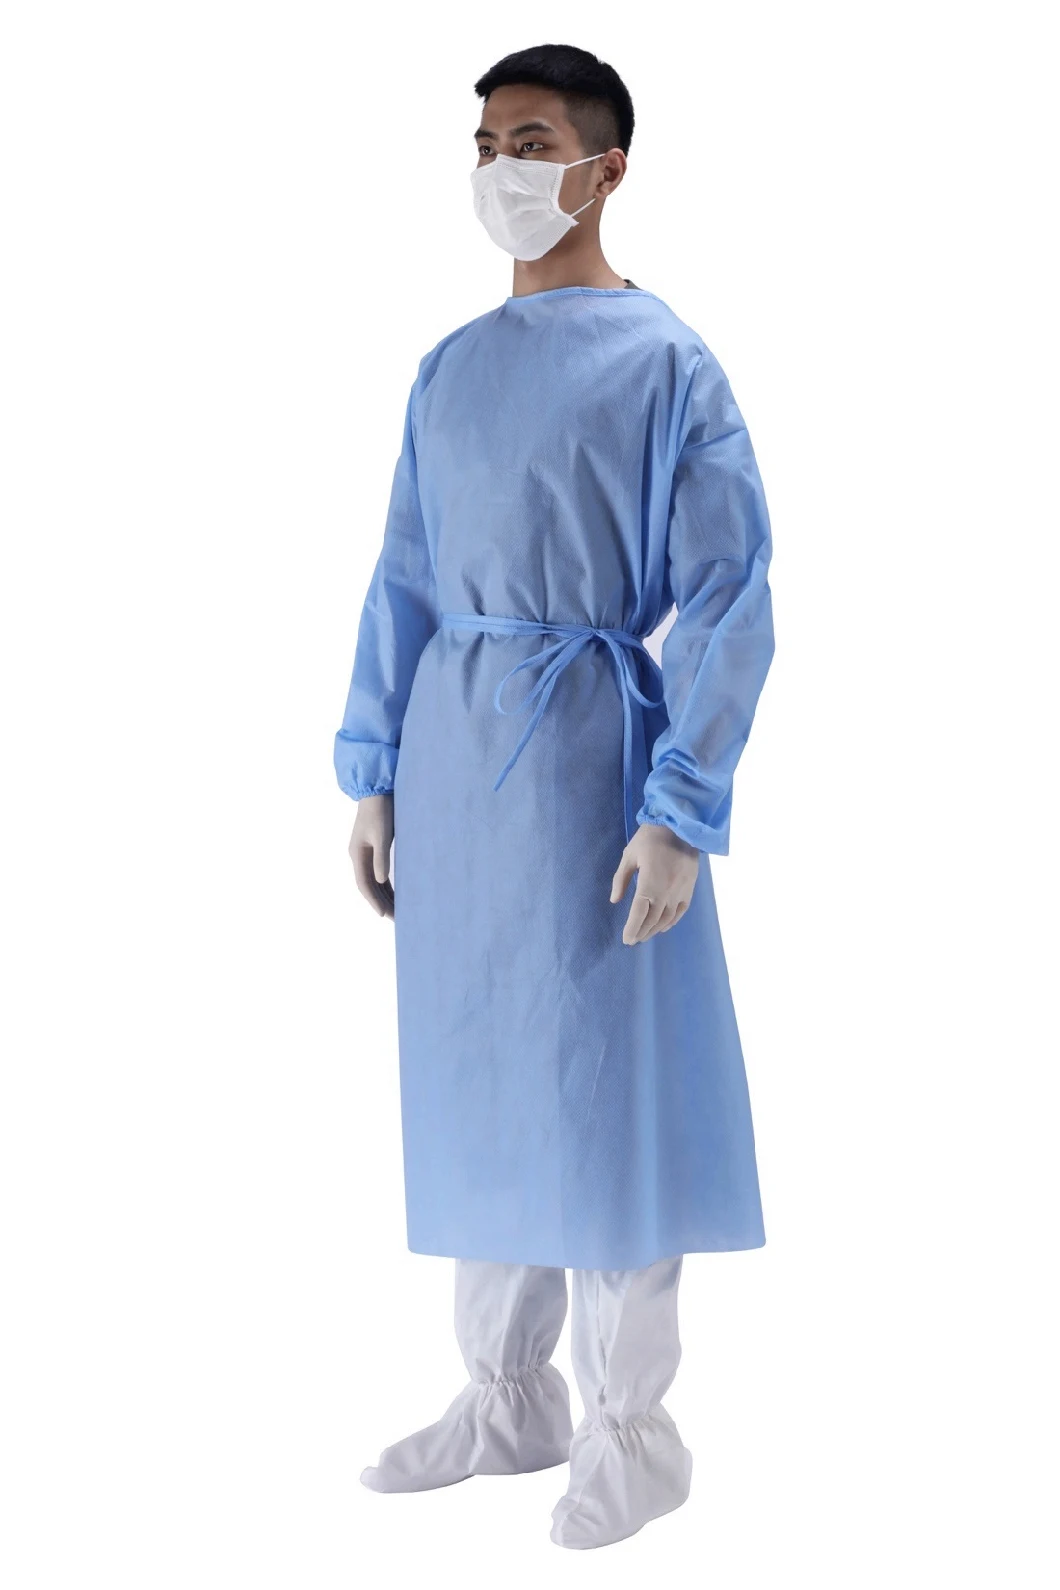 Disposable Non-Woven Surgical Gown, Disposable Sterile Nonwoven Surgical Gown, Disposable Green AAMI Protective Gown